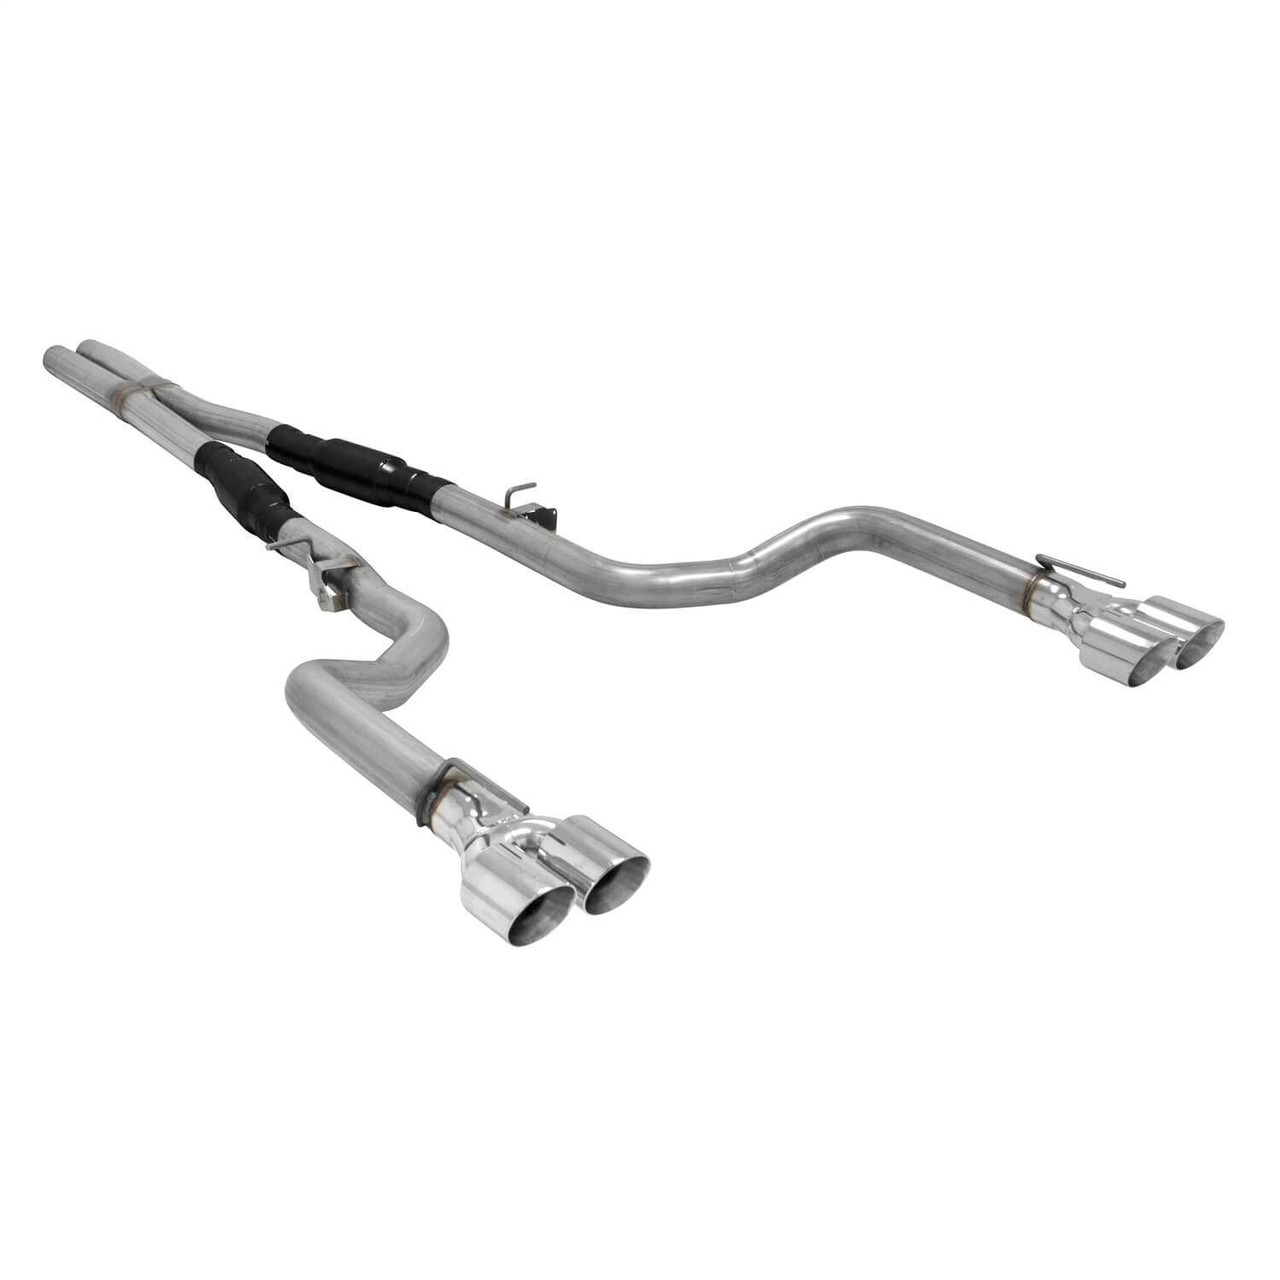 Flowmaster Outlaw Series Cat Back Exhaust System 817740 Free Shipping!